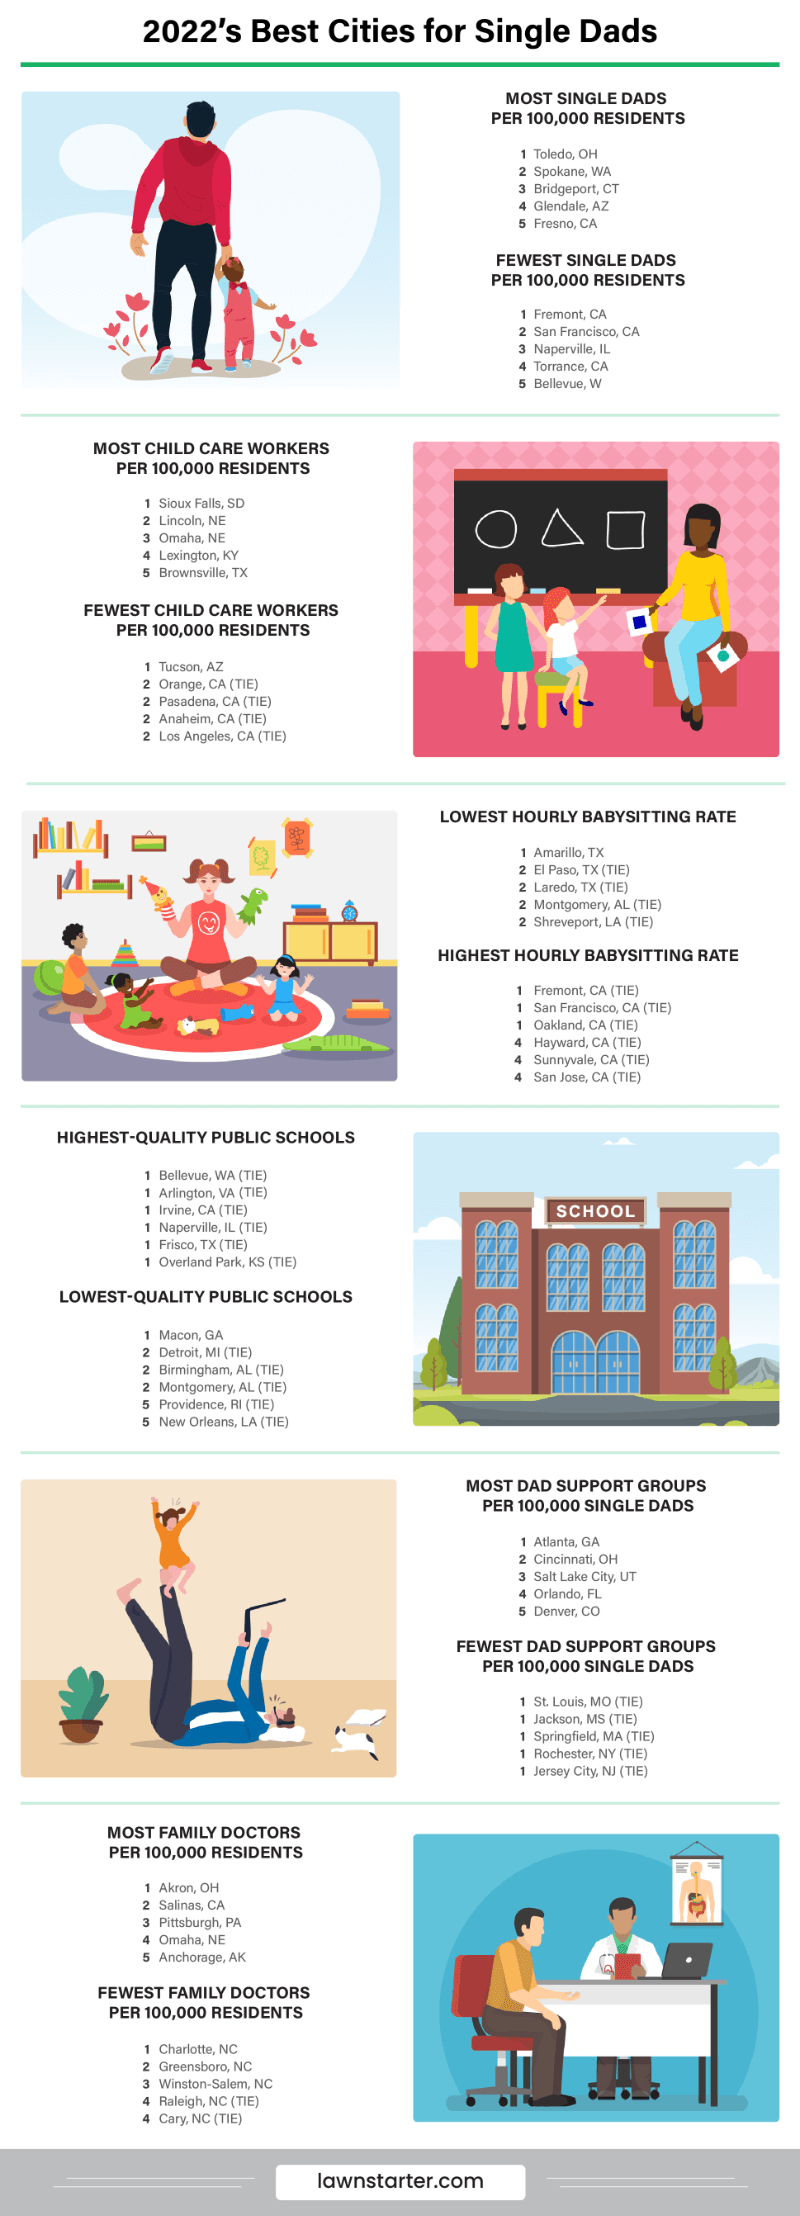 2022's Best Cities for Single Dads Infographic is based on the amount of single dads, childcare workers, babysitting cost, and more!